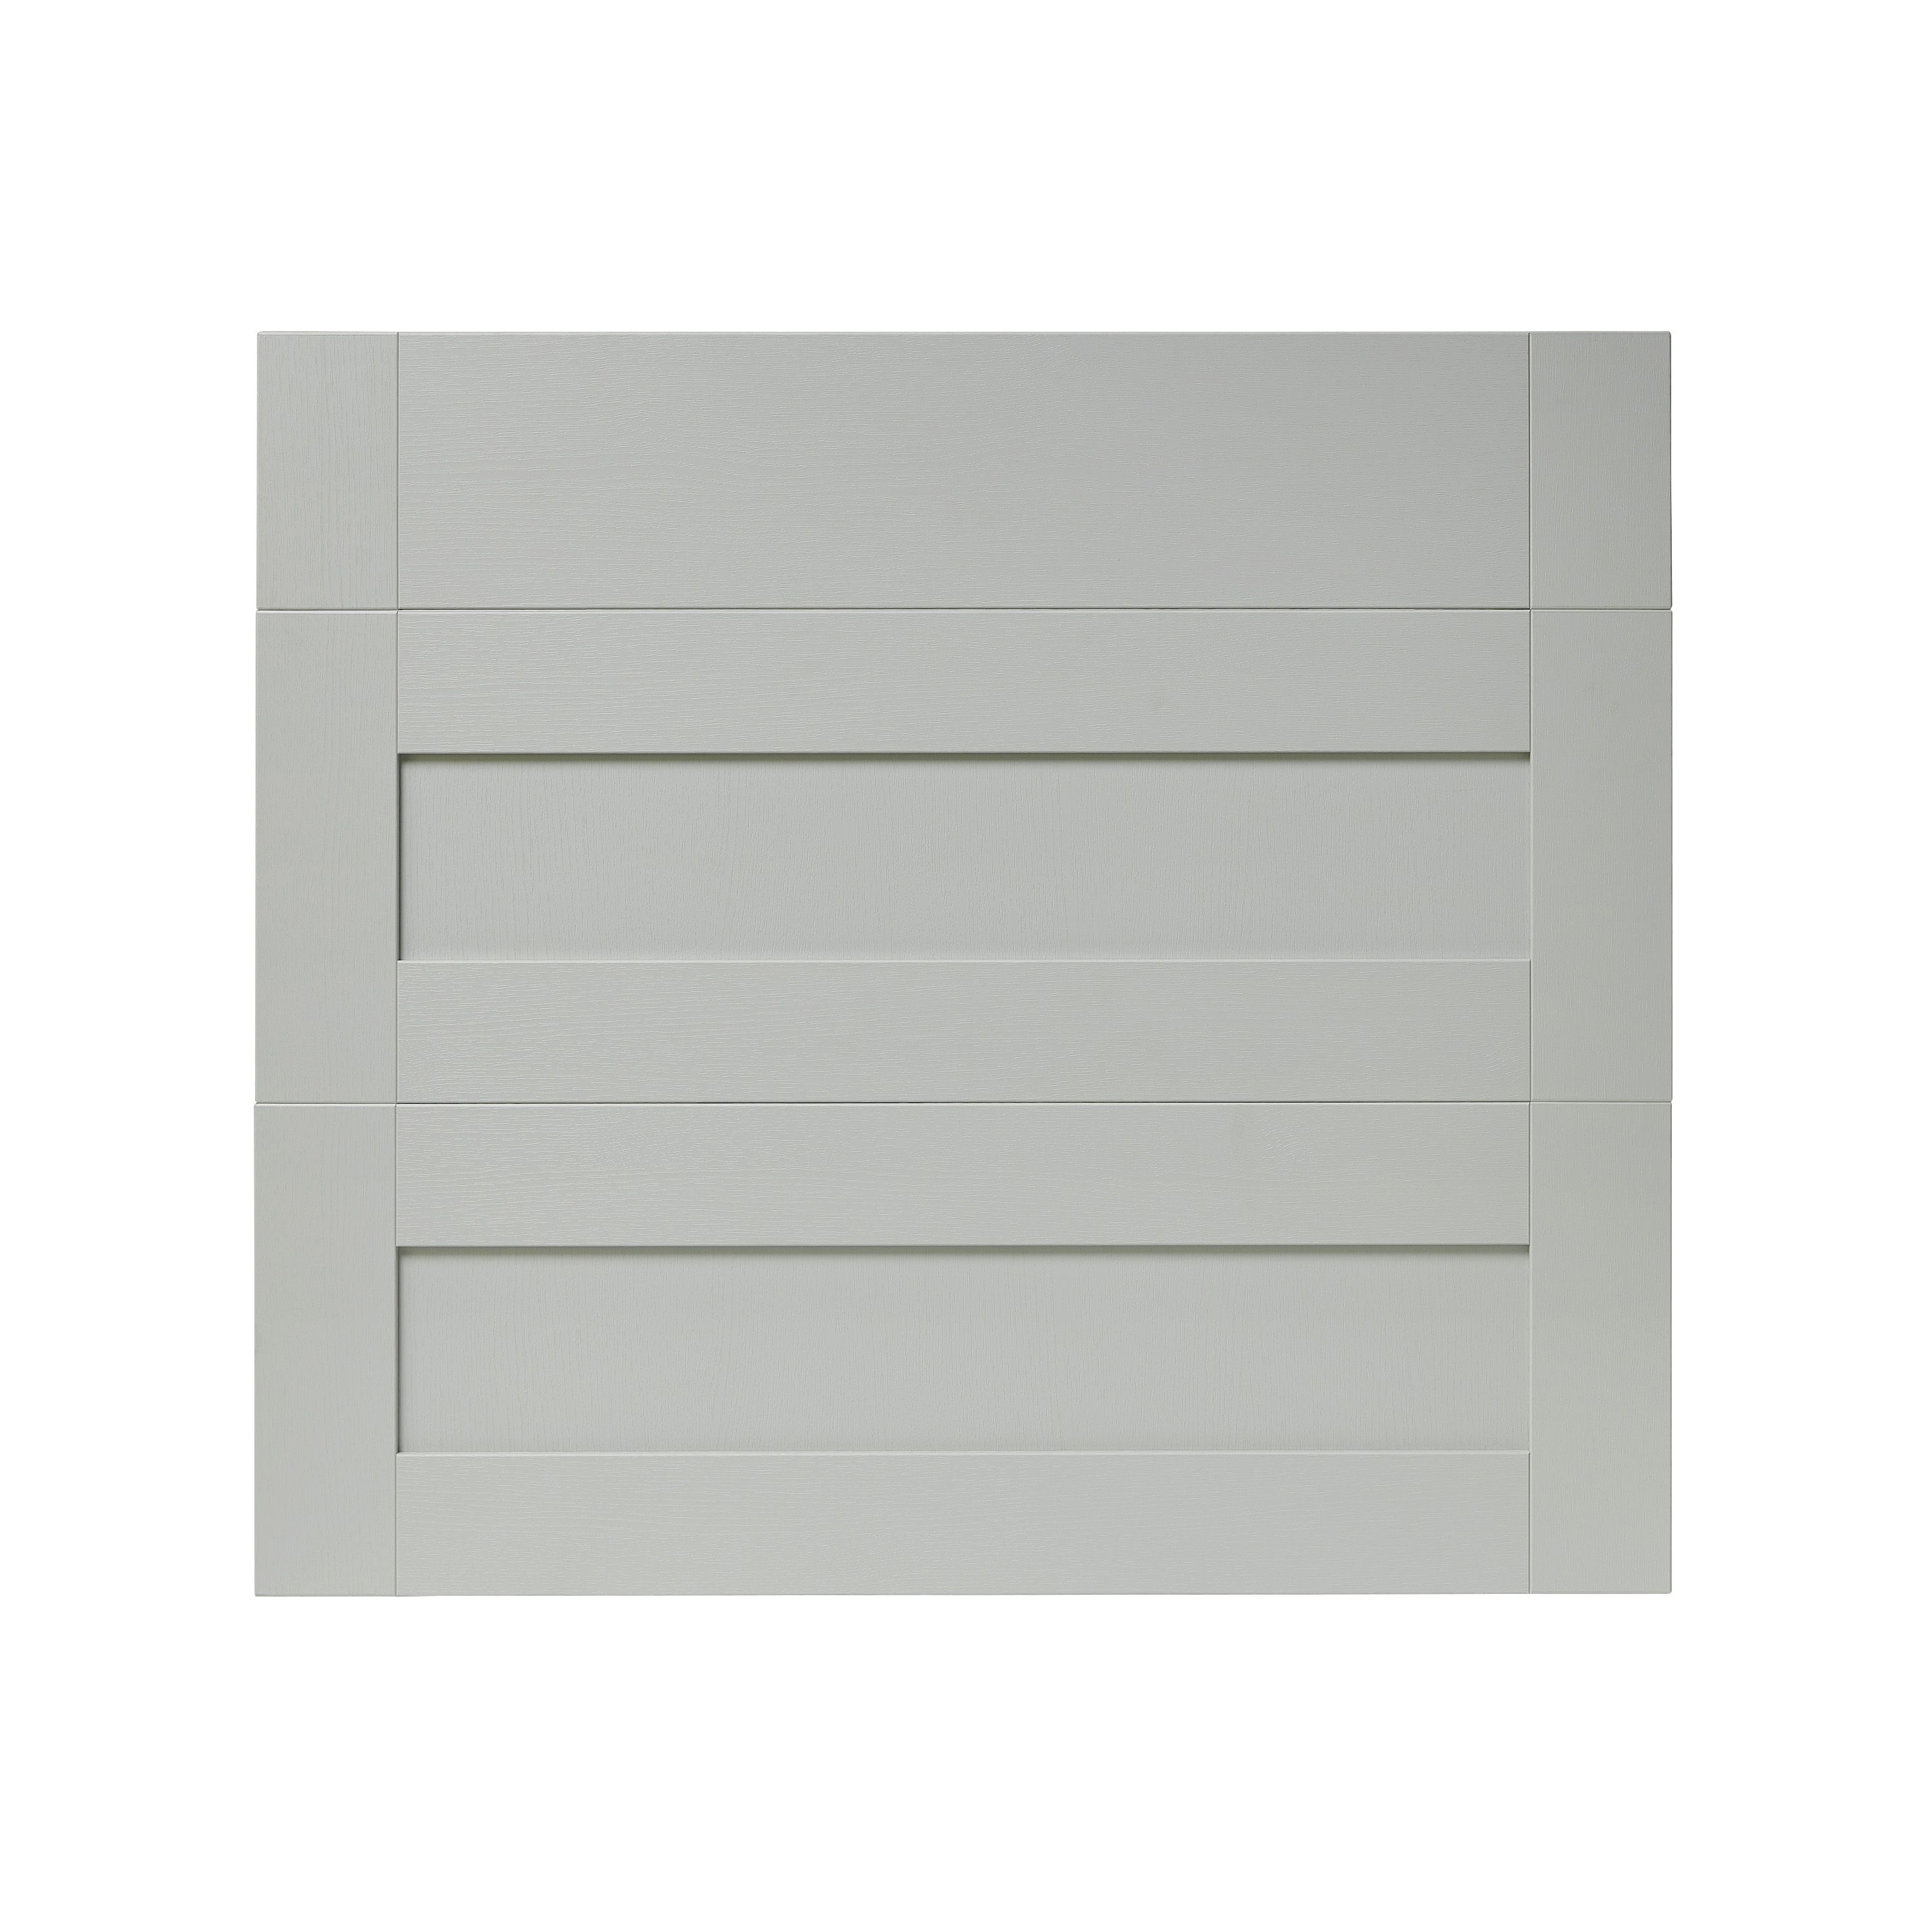 GoodHome Alpinia Matt grey painted wood effect shaker Drawer front (W)800mm, Pack of 3